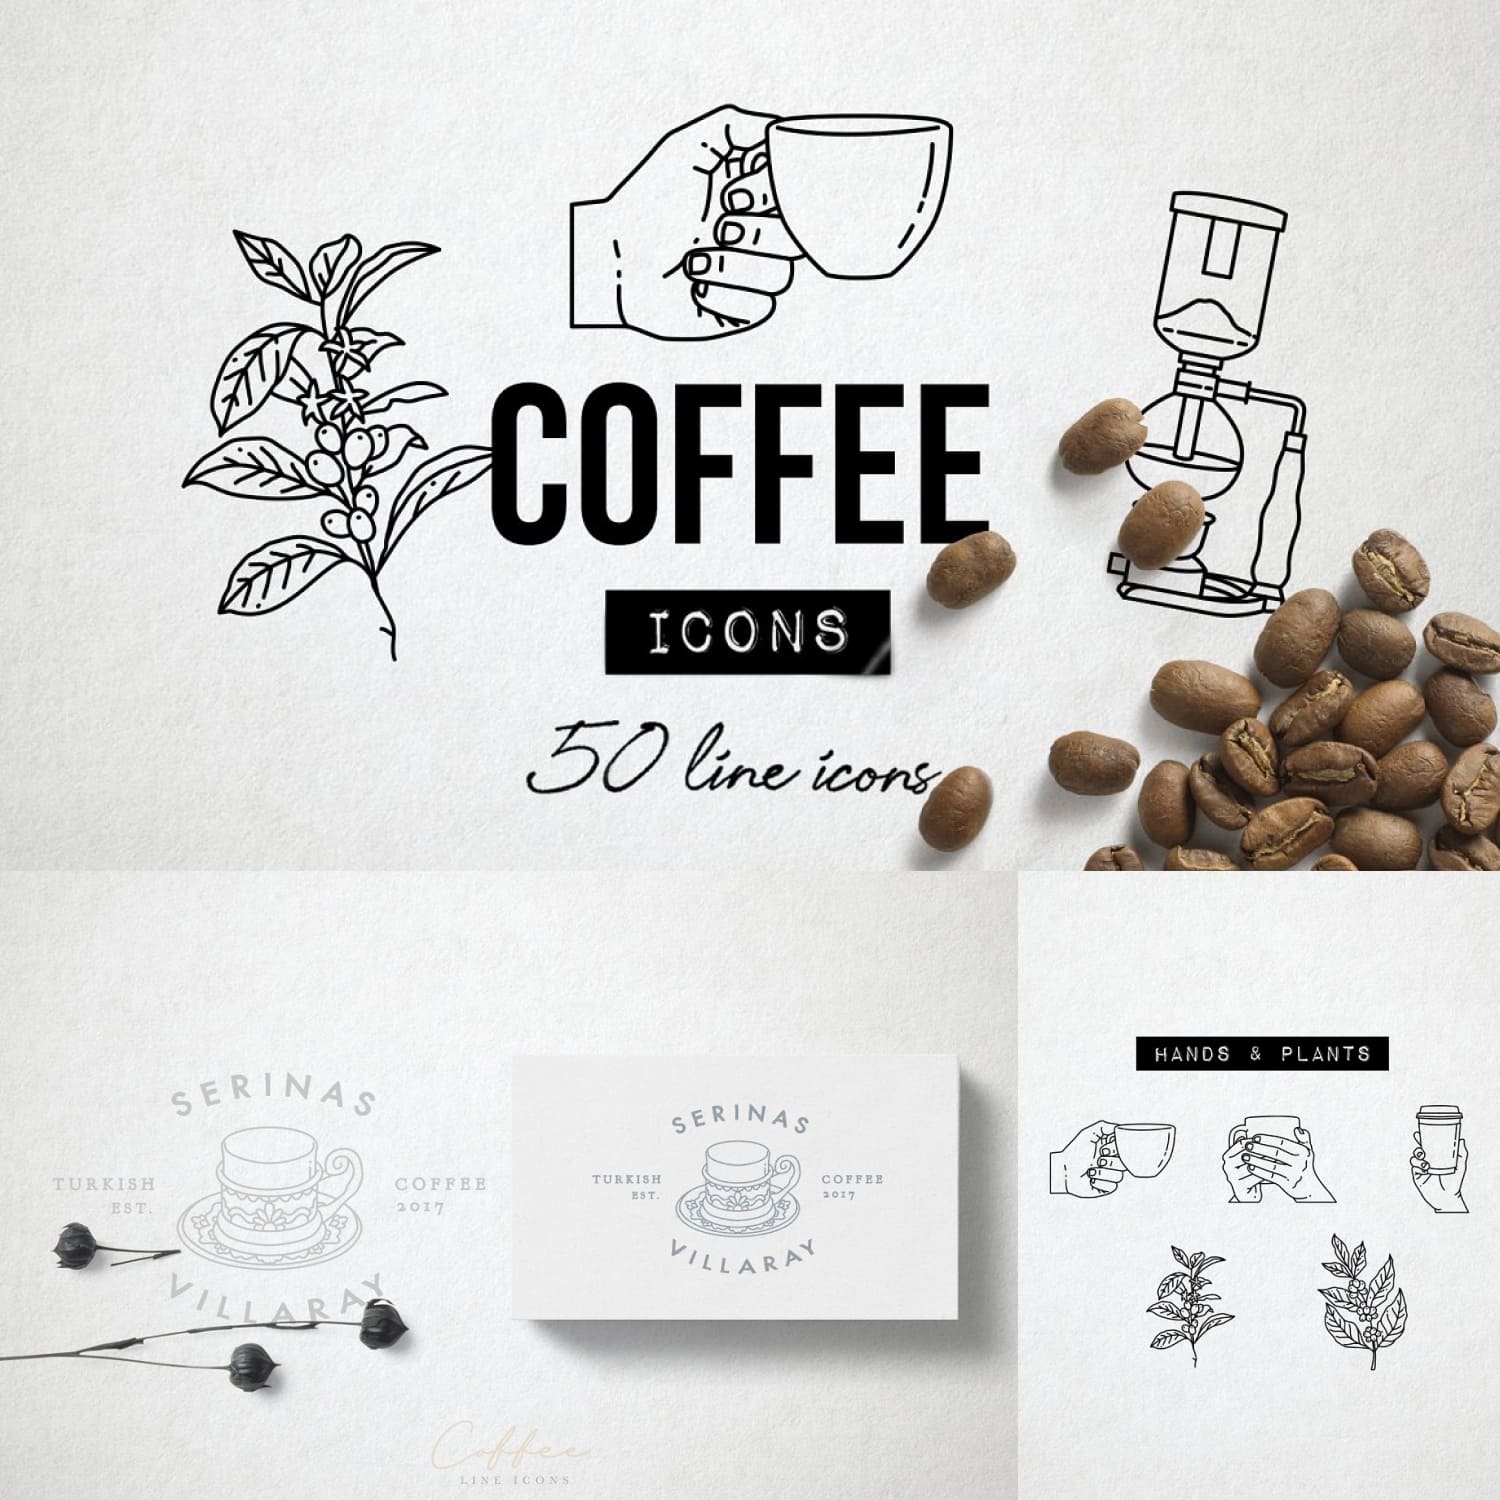 Preview coffee icons set graphics.